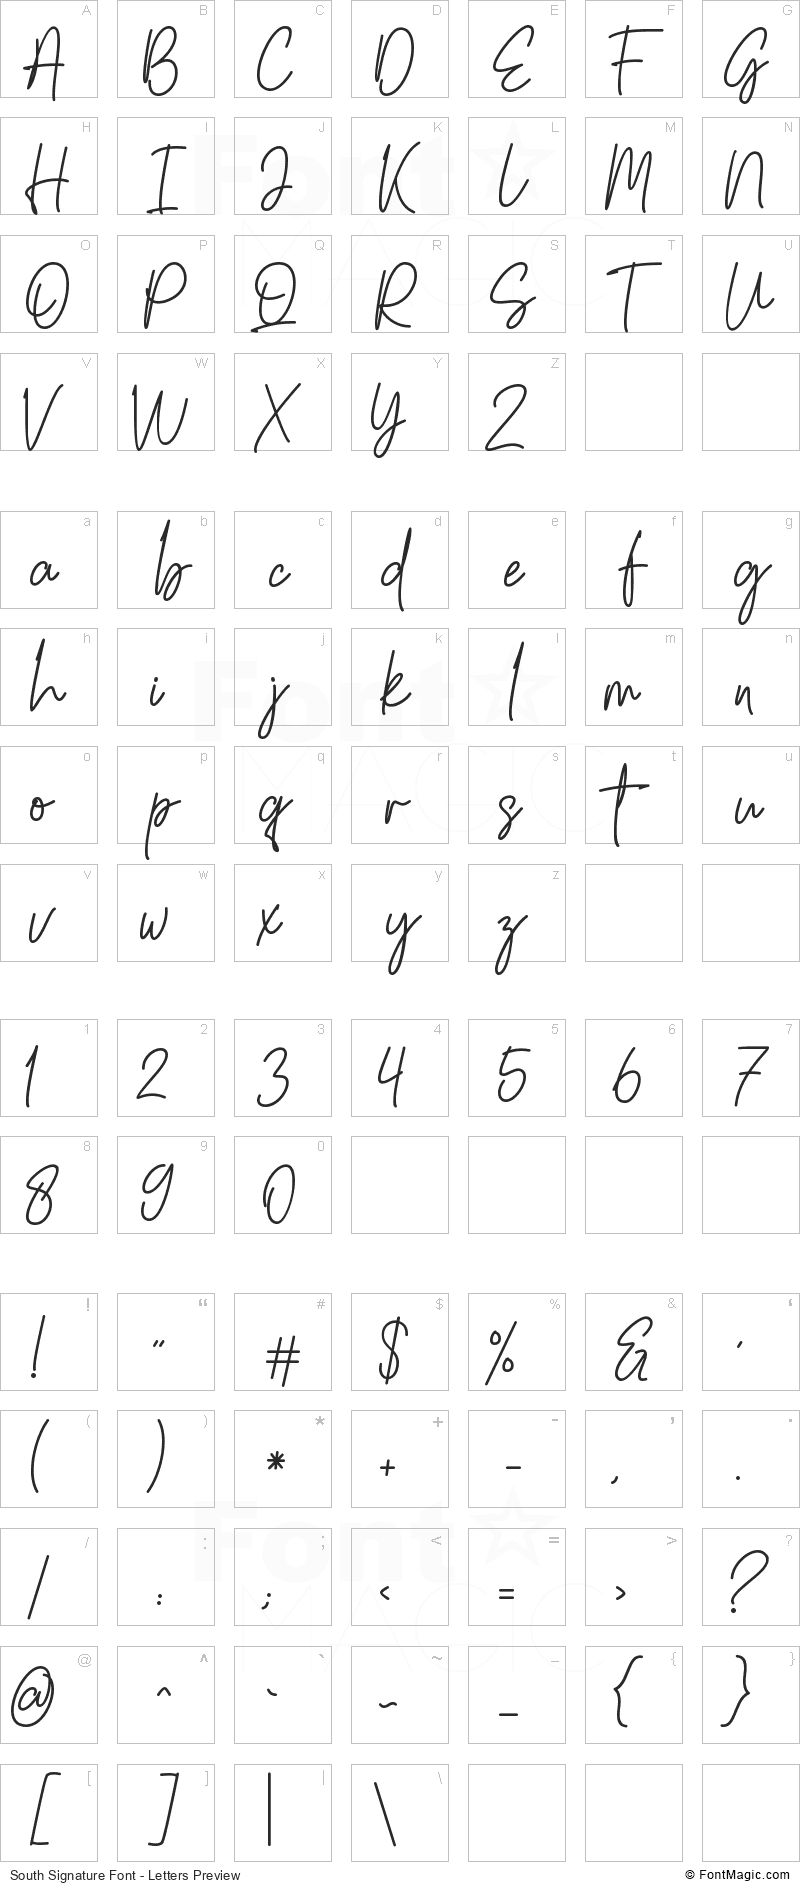 South Signature Font - All Latters Preview Chart